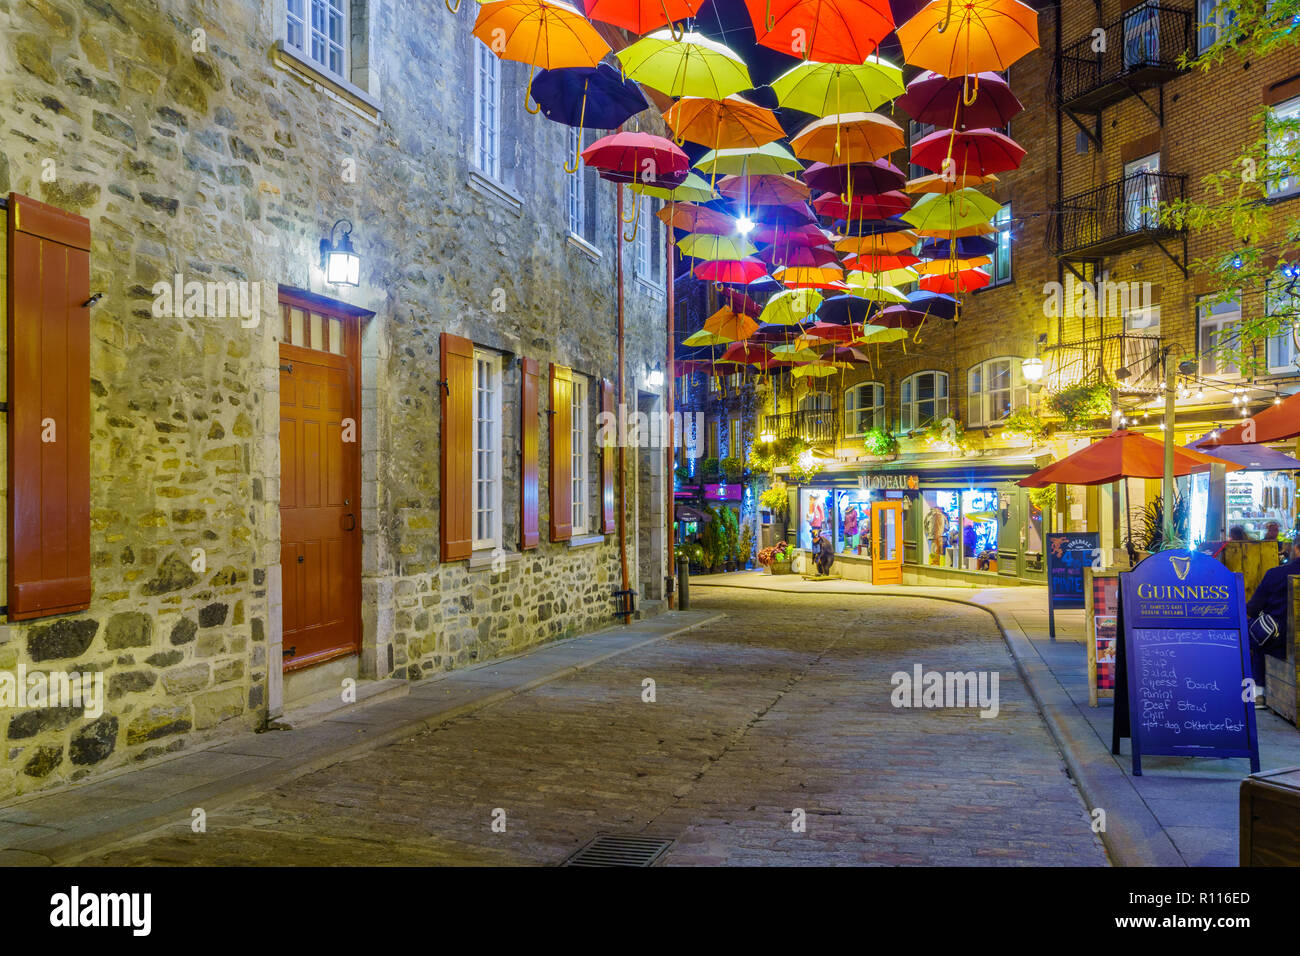 Quebec City, Canada - September 27, 2018: Night view of the Umbrella Alley in the lower town, Quebec City, Quebec, Canada Stock Photo